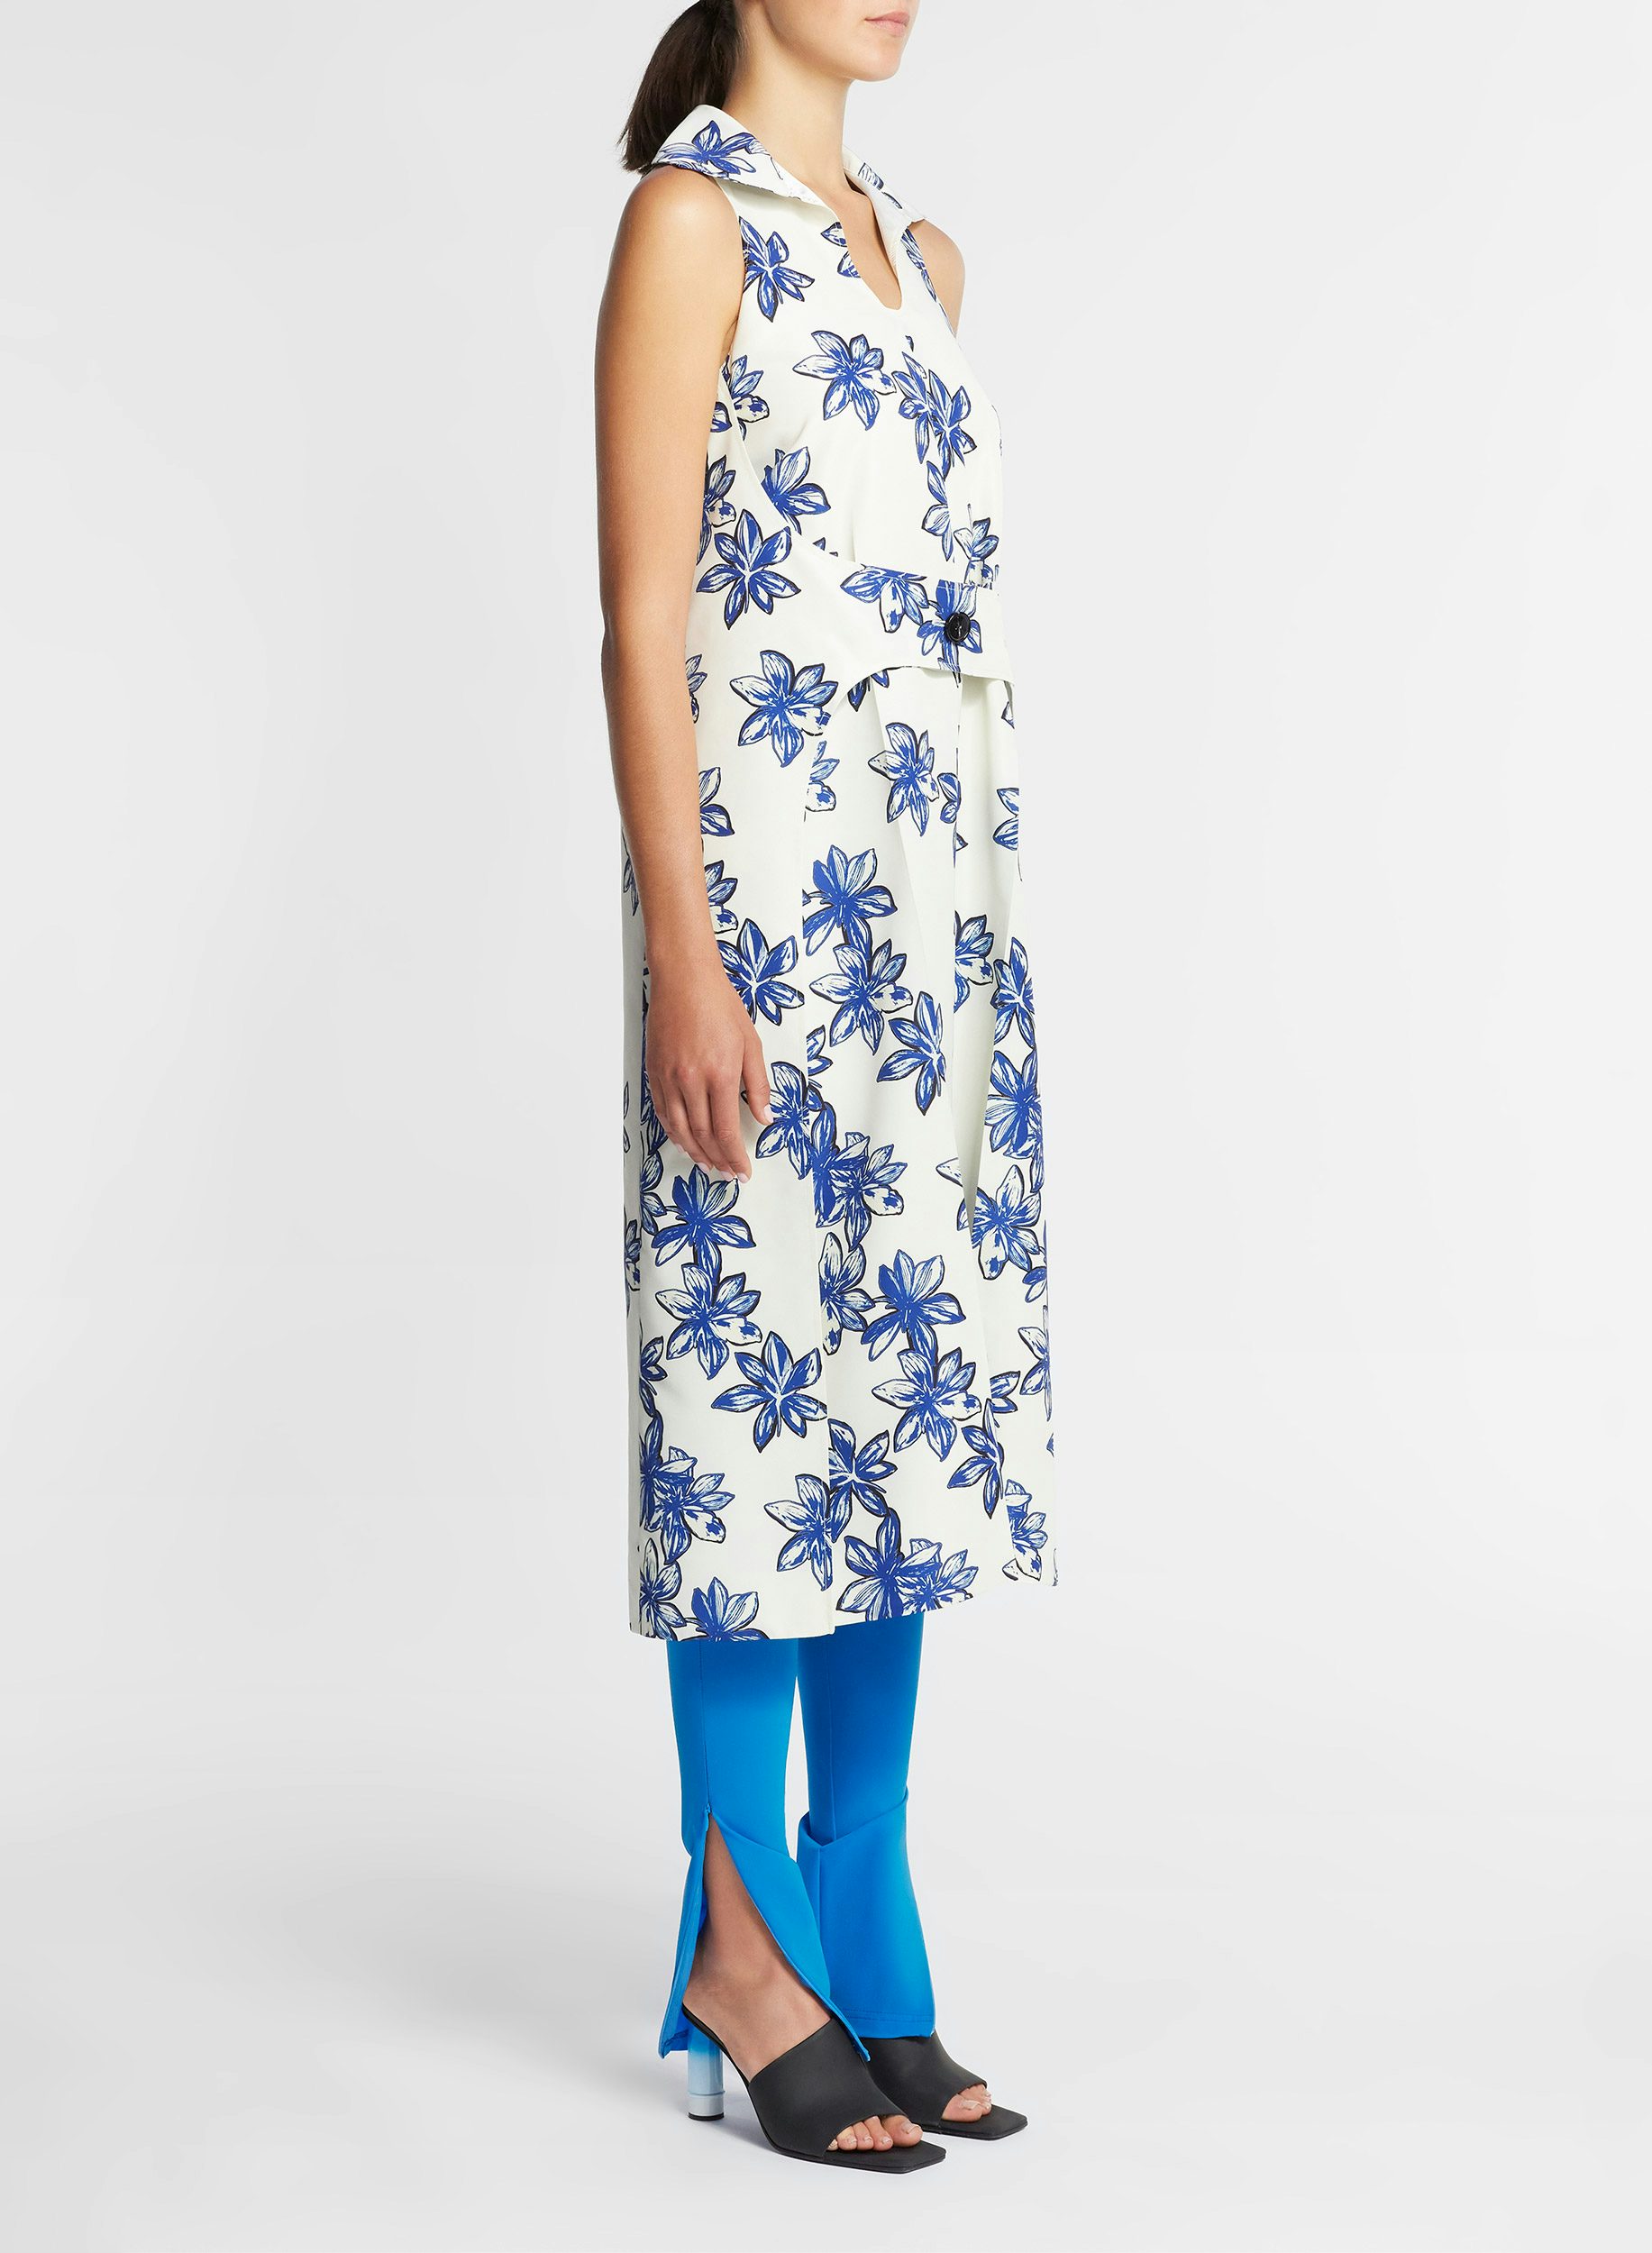 Sleeveless dress open at the sides and tied at the front in lotus flower print - Nina Ricci